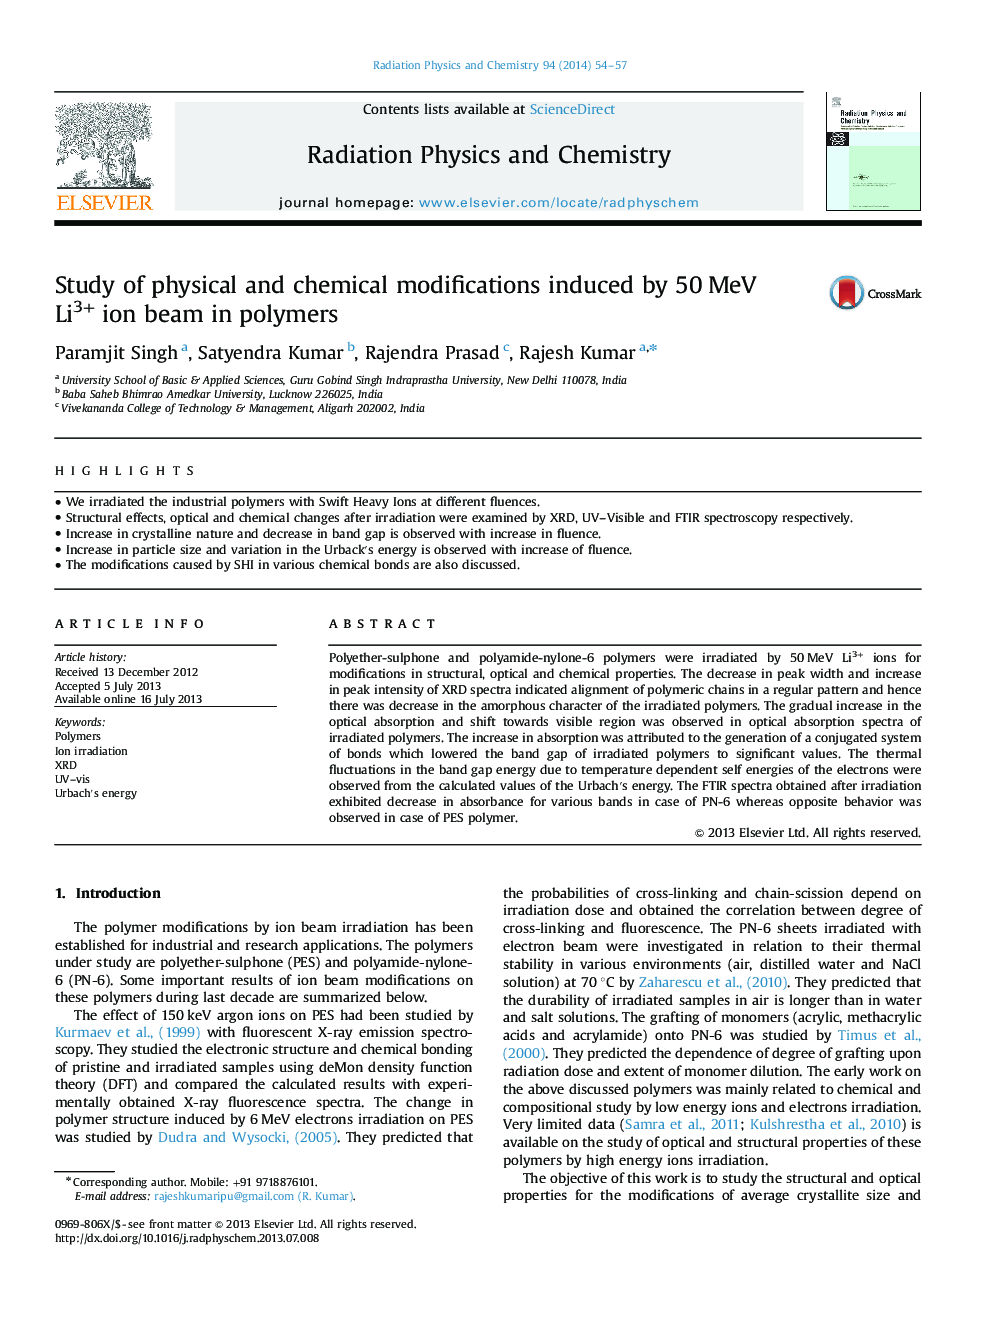 Study of physical and chemical modifications induced by 50 MeV Li3+ ion beam in polymers